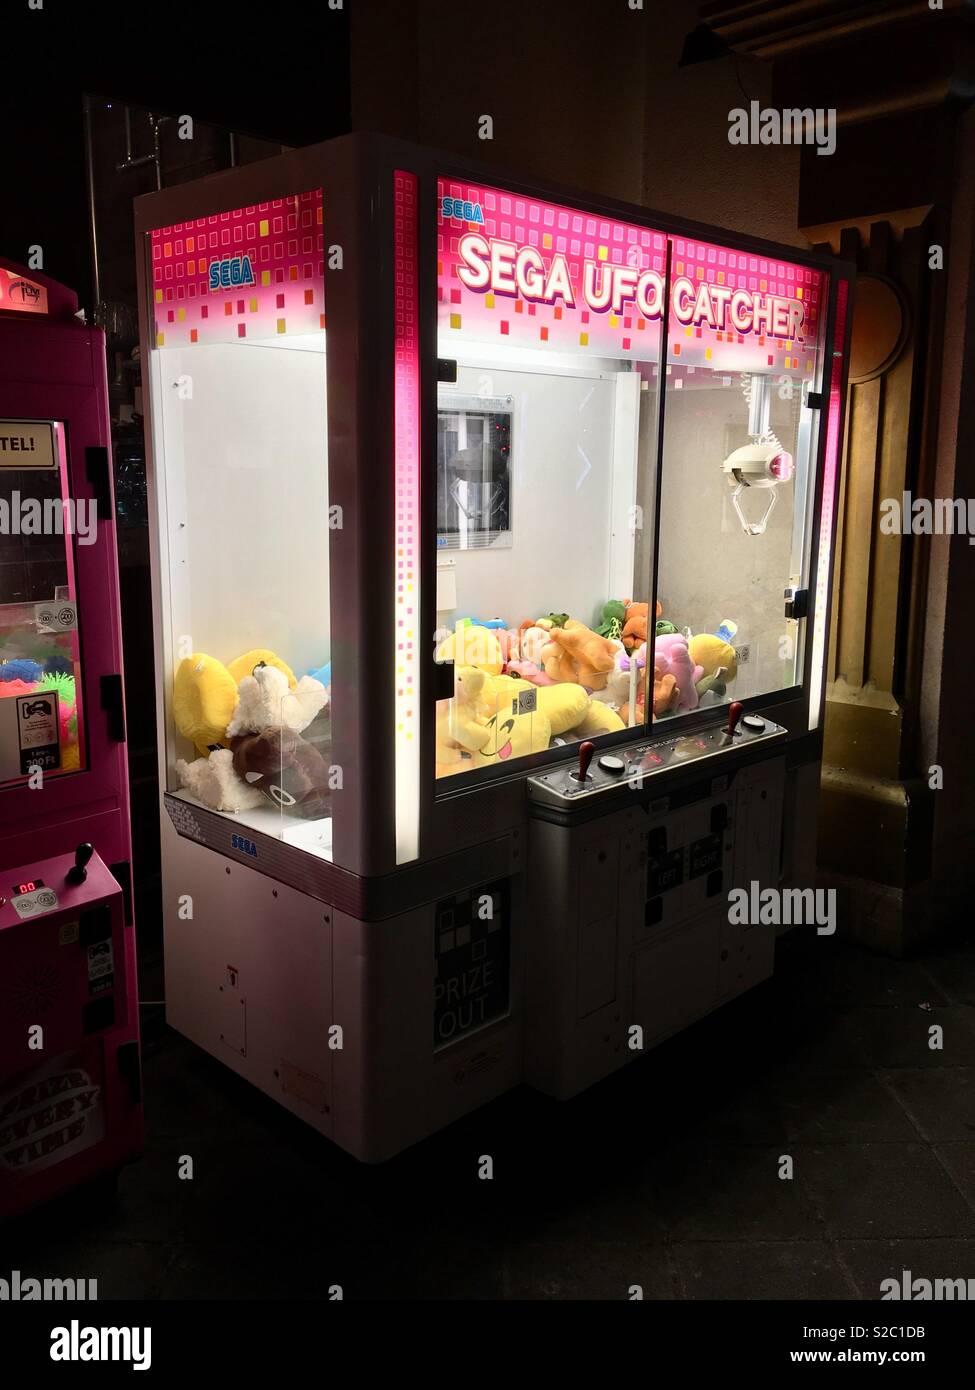 A Sega UFO Catcher in a hall specialising in retro arcade games. Budapest, Hungary. Stock Photo